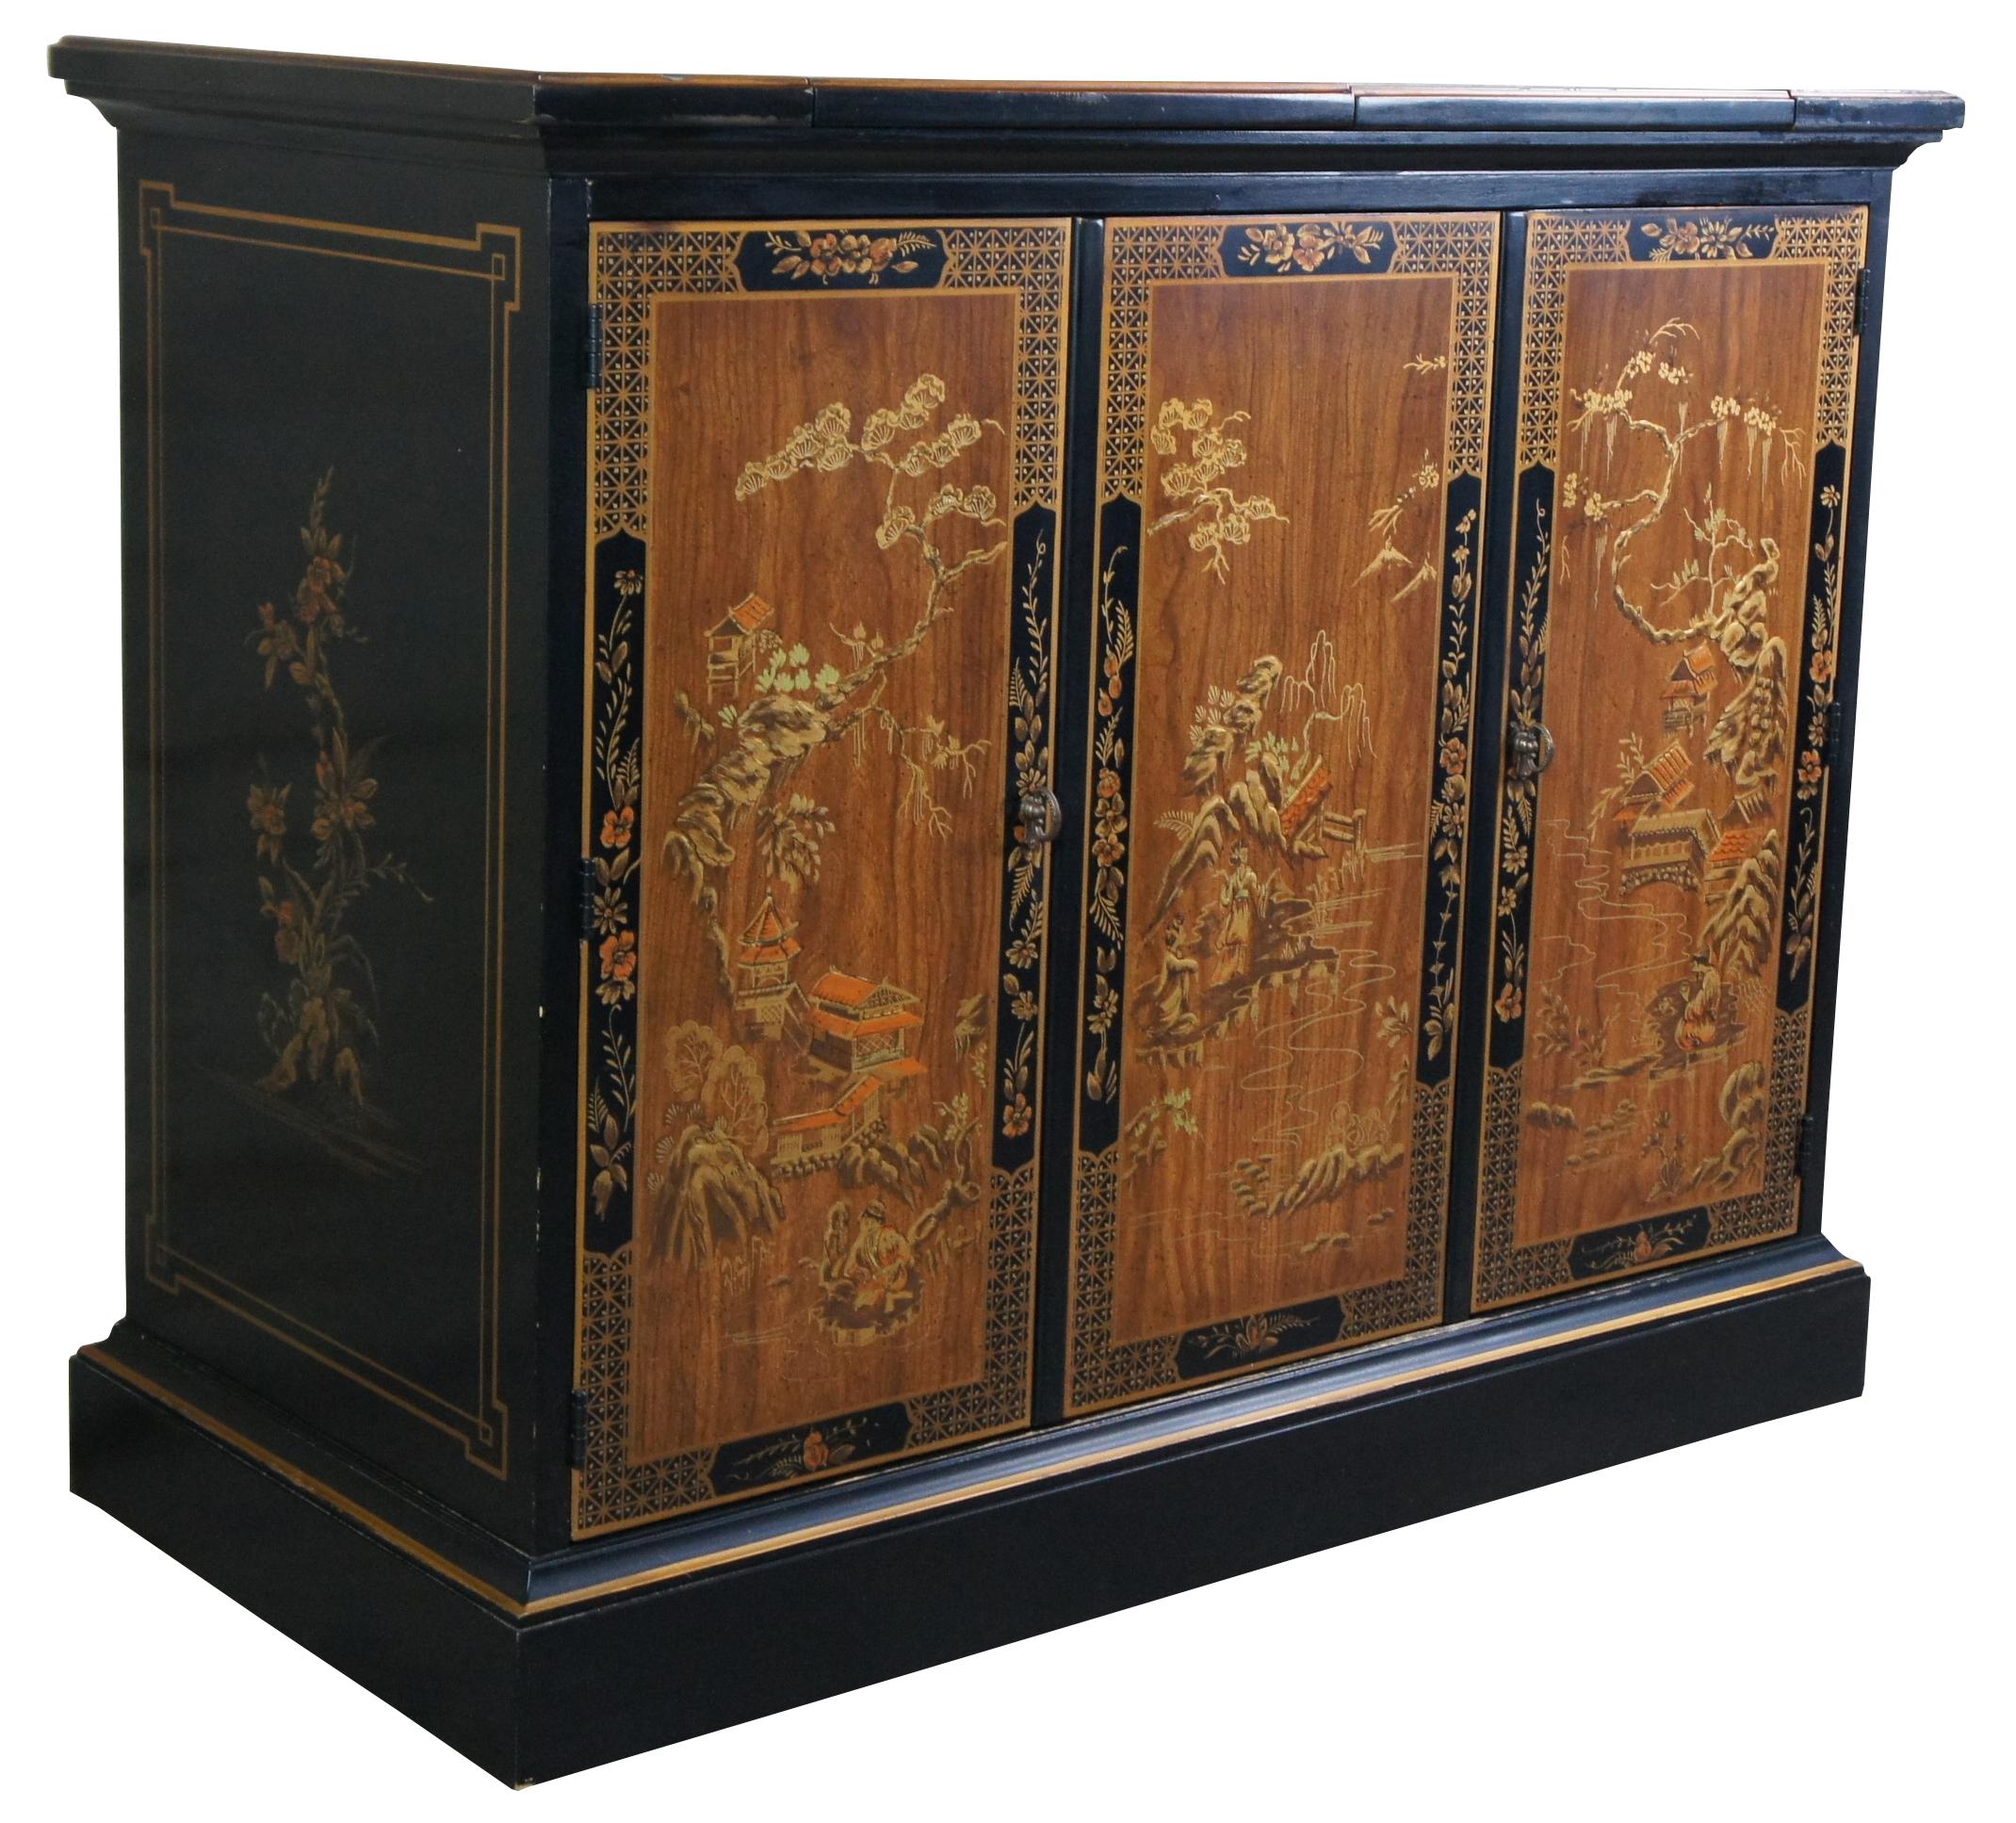 Drexel Et Cetera Chinoiserie buffet, cabinet, server or dry bar, circa 1978. A rectangular form with black lacquer and natural wood front finished in beautiful pagoda and geisha landscapes. The cabinet is trimmed in gold with floral and fruit